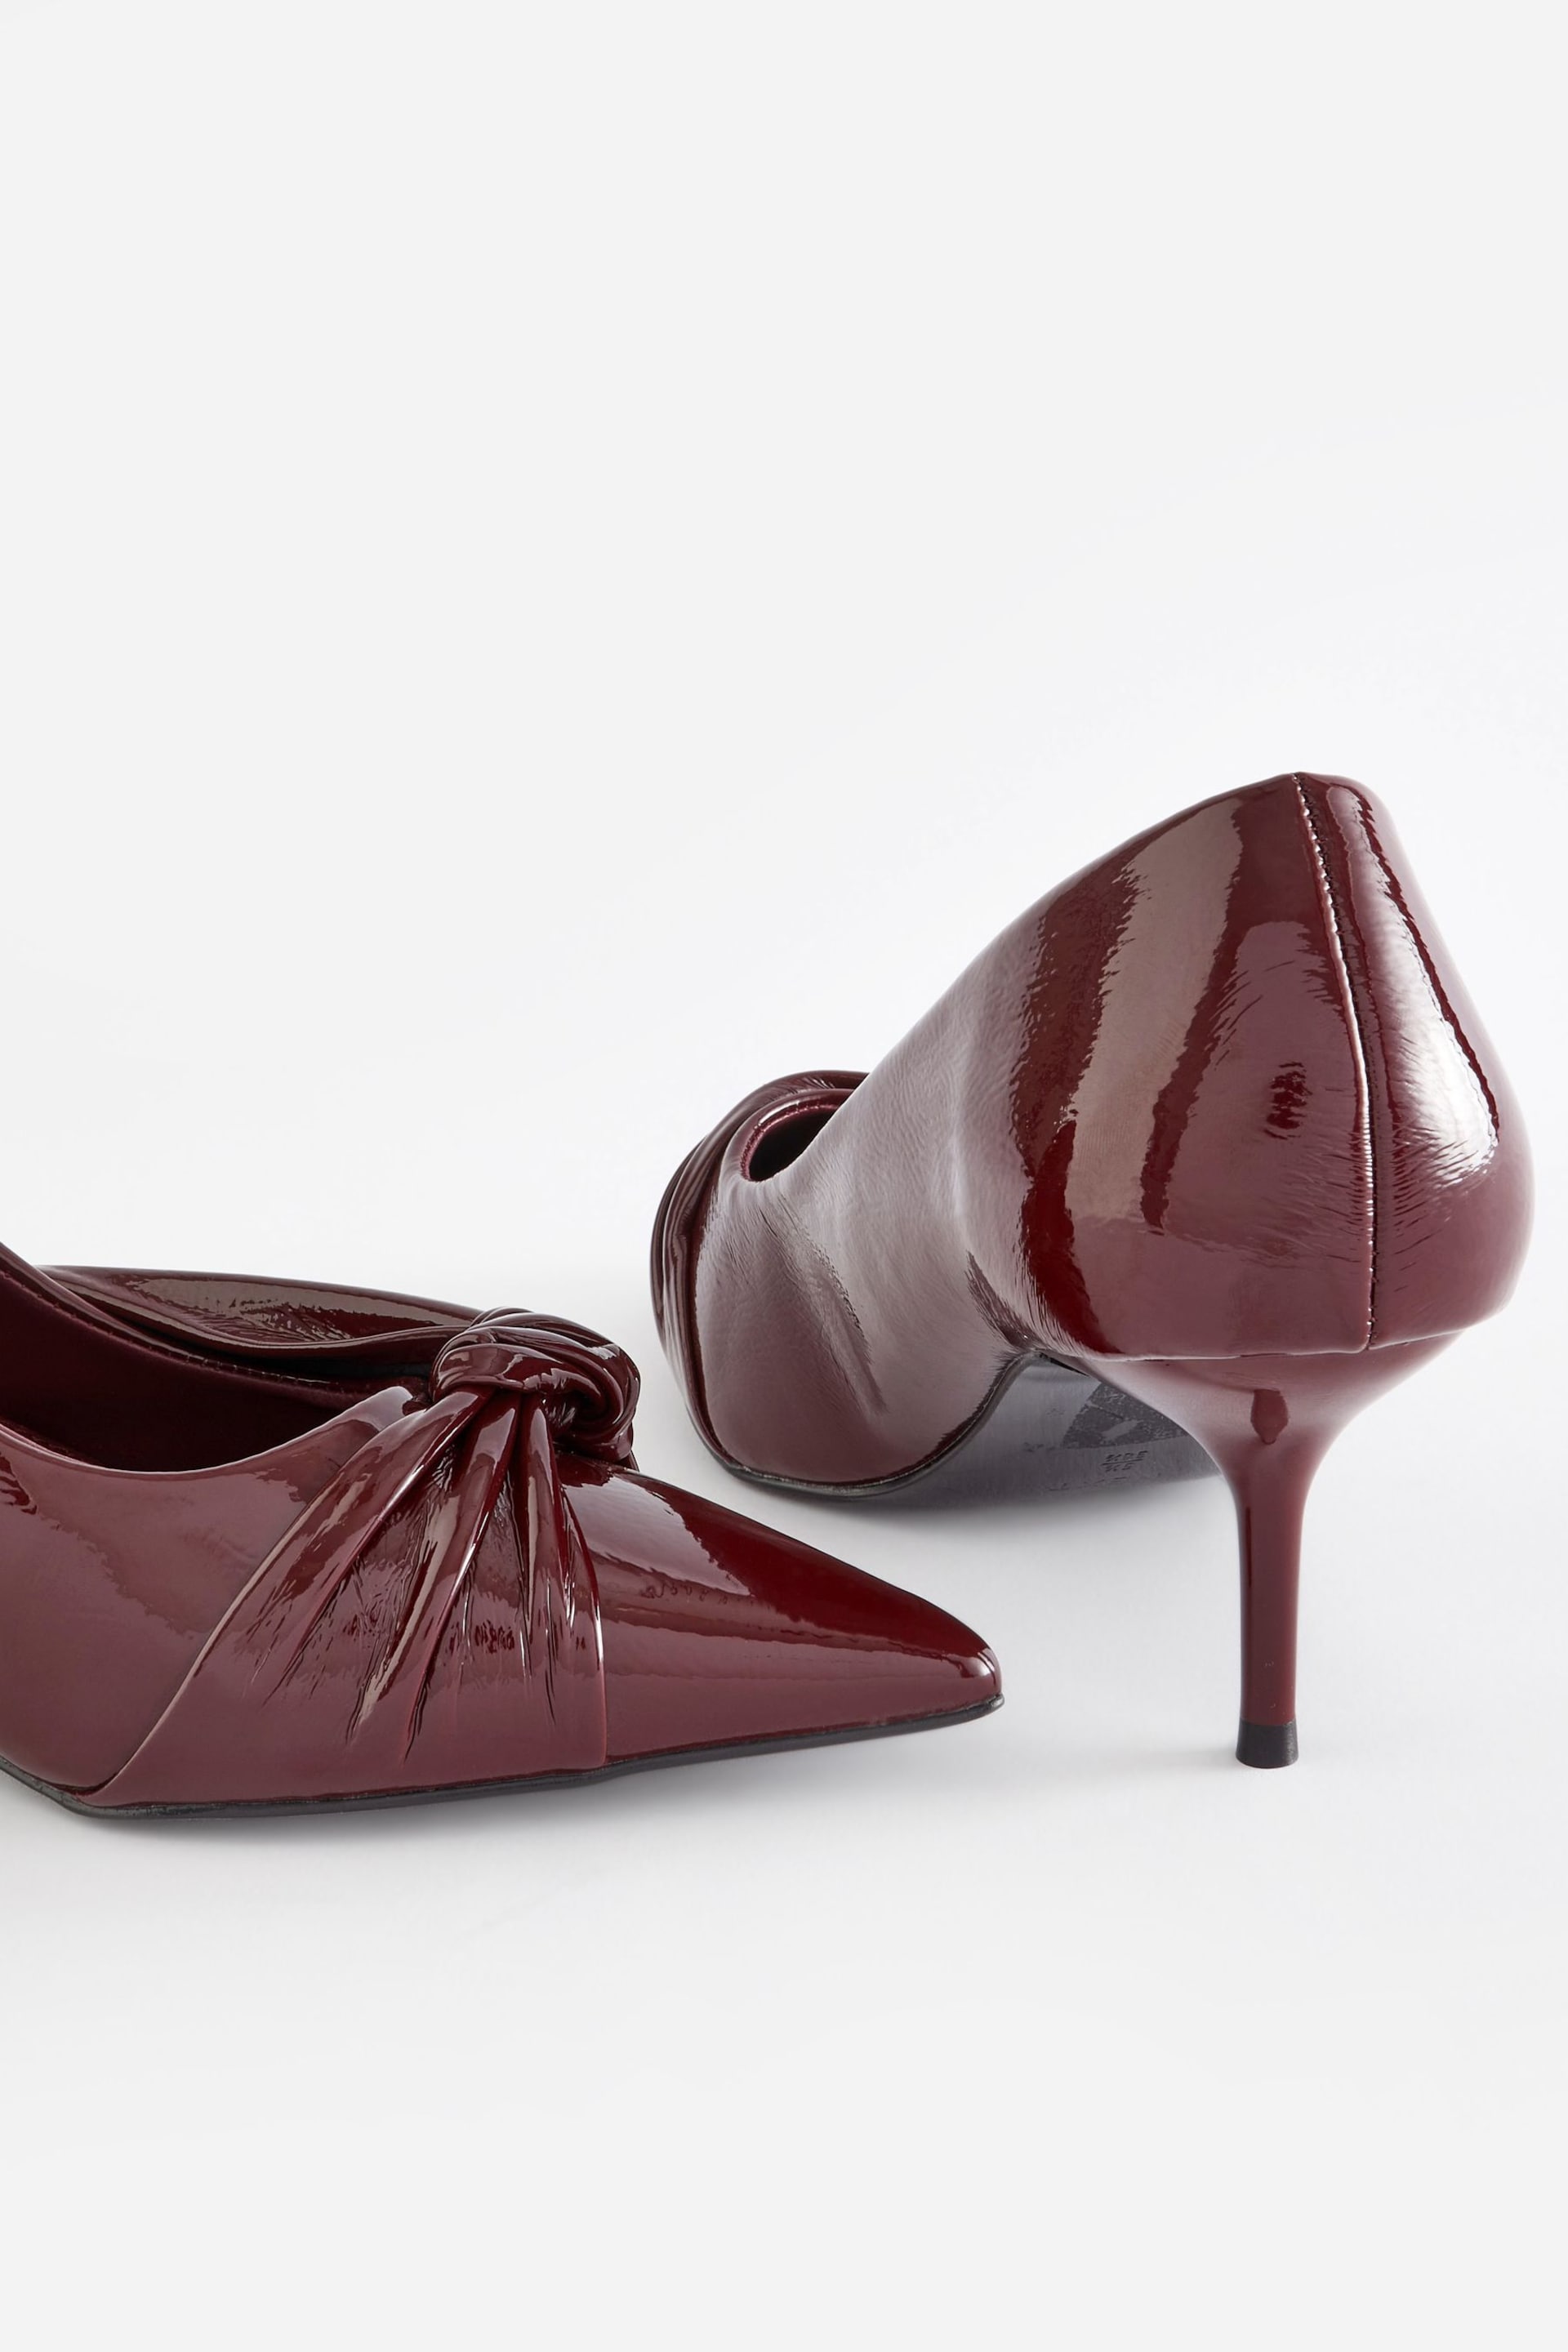 Berry Red Forever Comfort® Asymmetric Bow Kitten Heels - Image 10 of 11